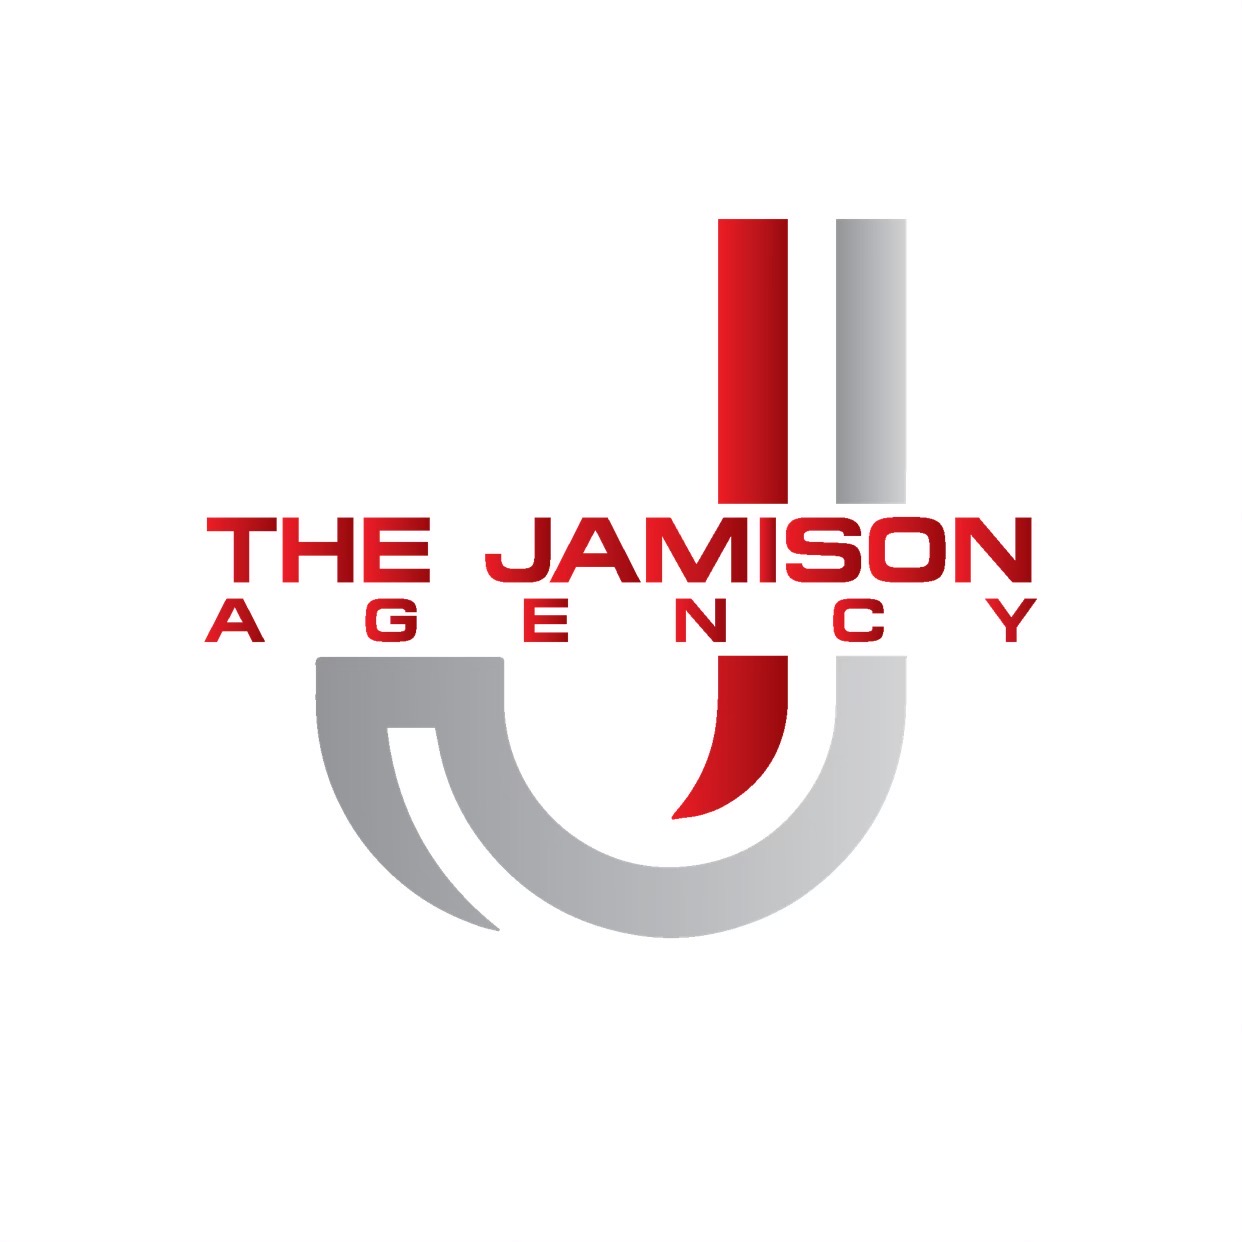 The Jamison Agency